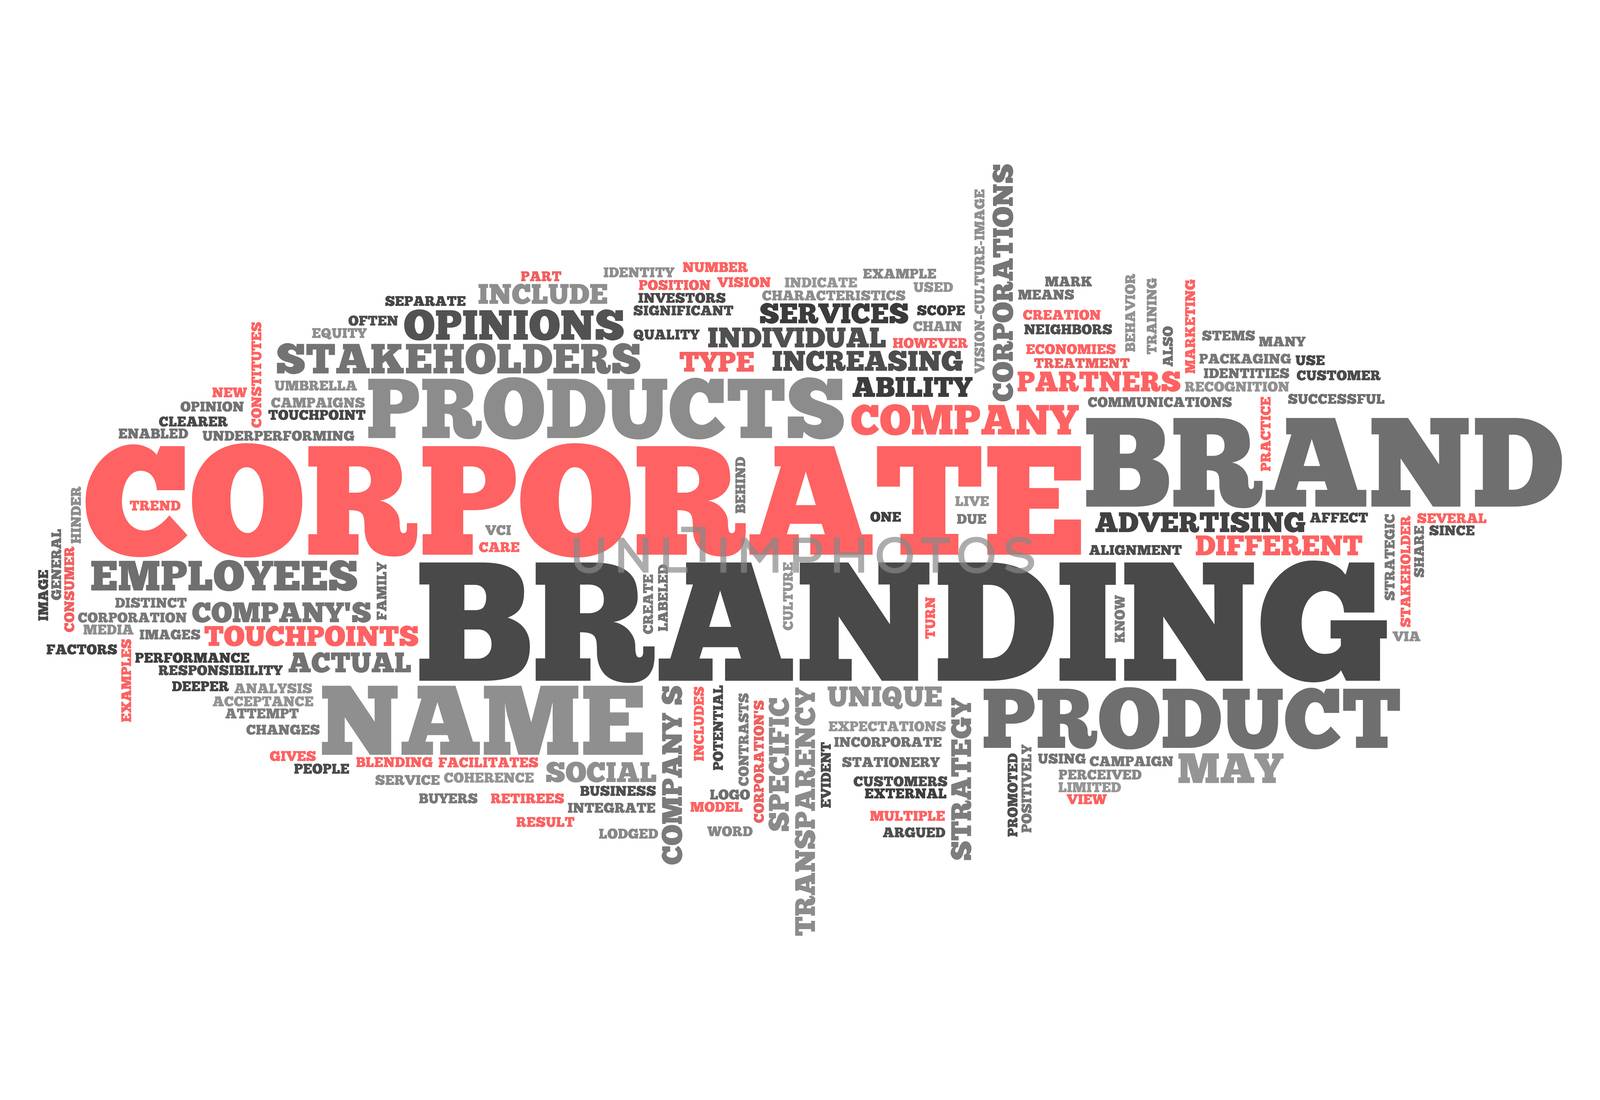 Word Cloud with Corporate Branding related tags